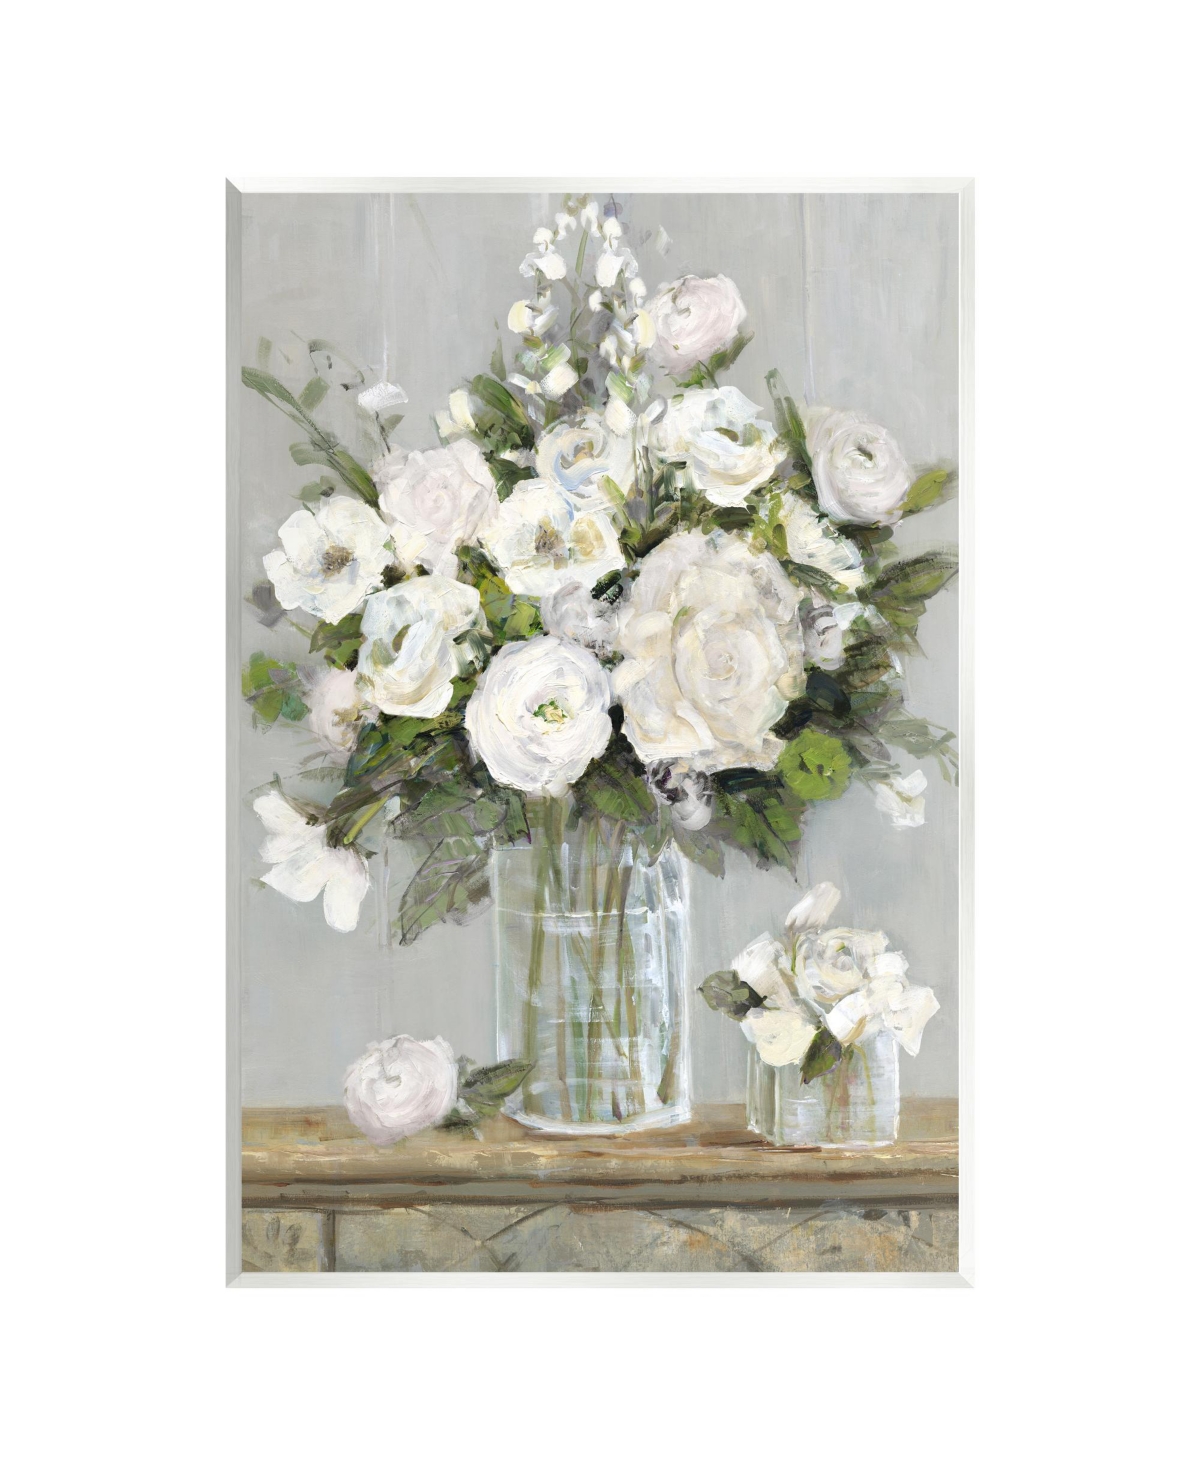 Stupell Industries Country Floral Scene Wall Plaque Art, 10" X 15" In Multi-color